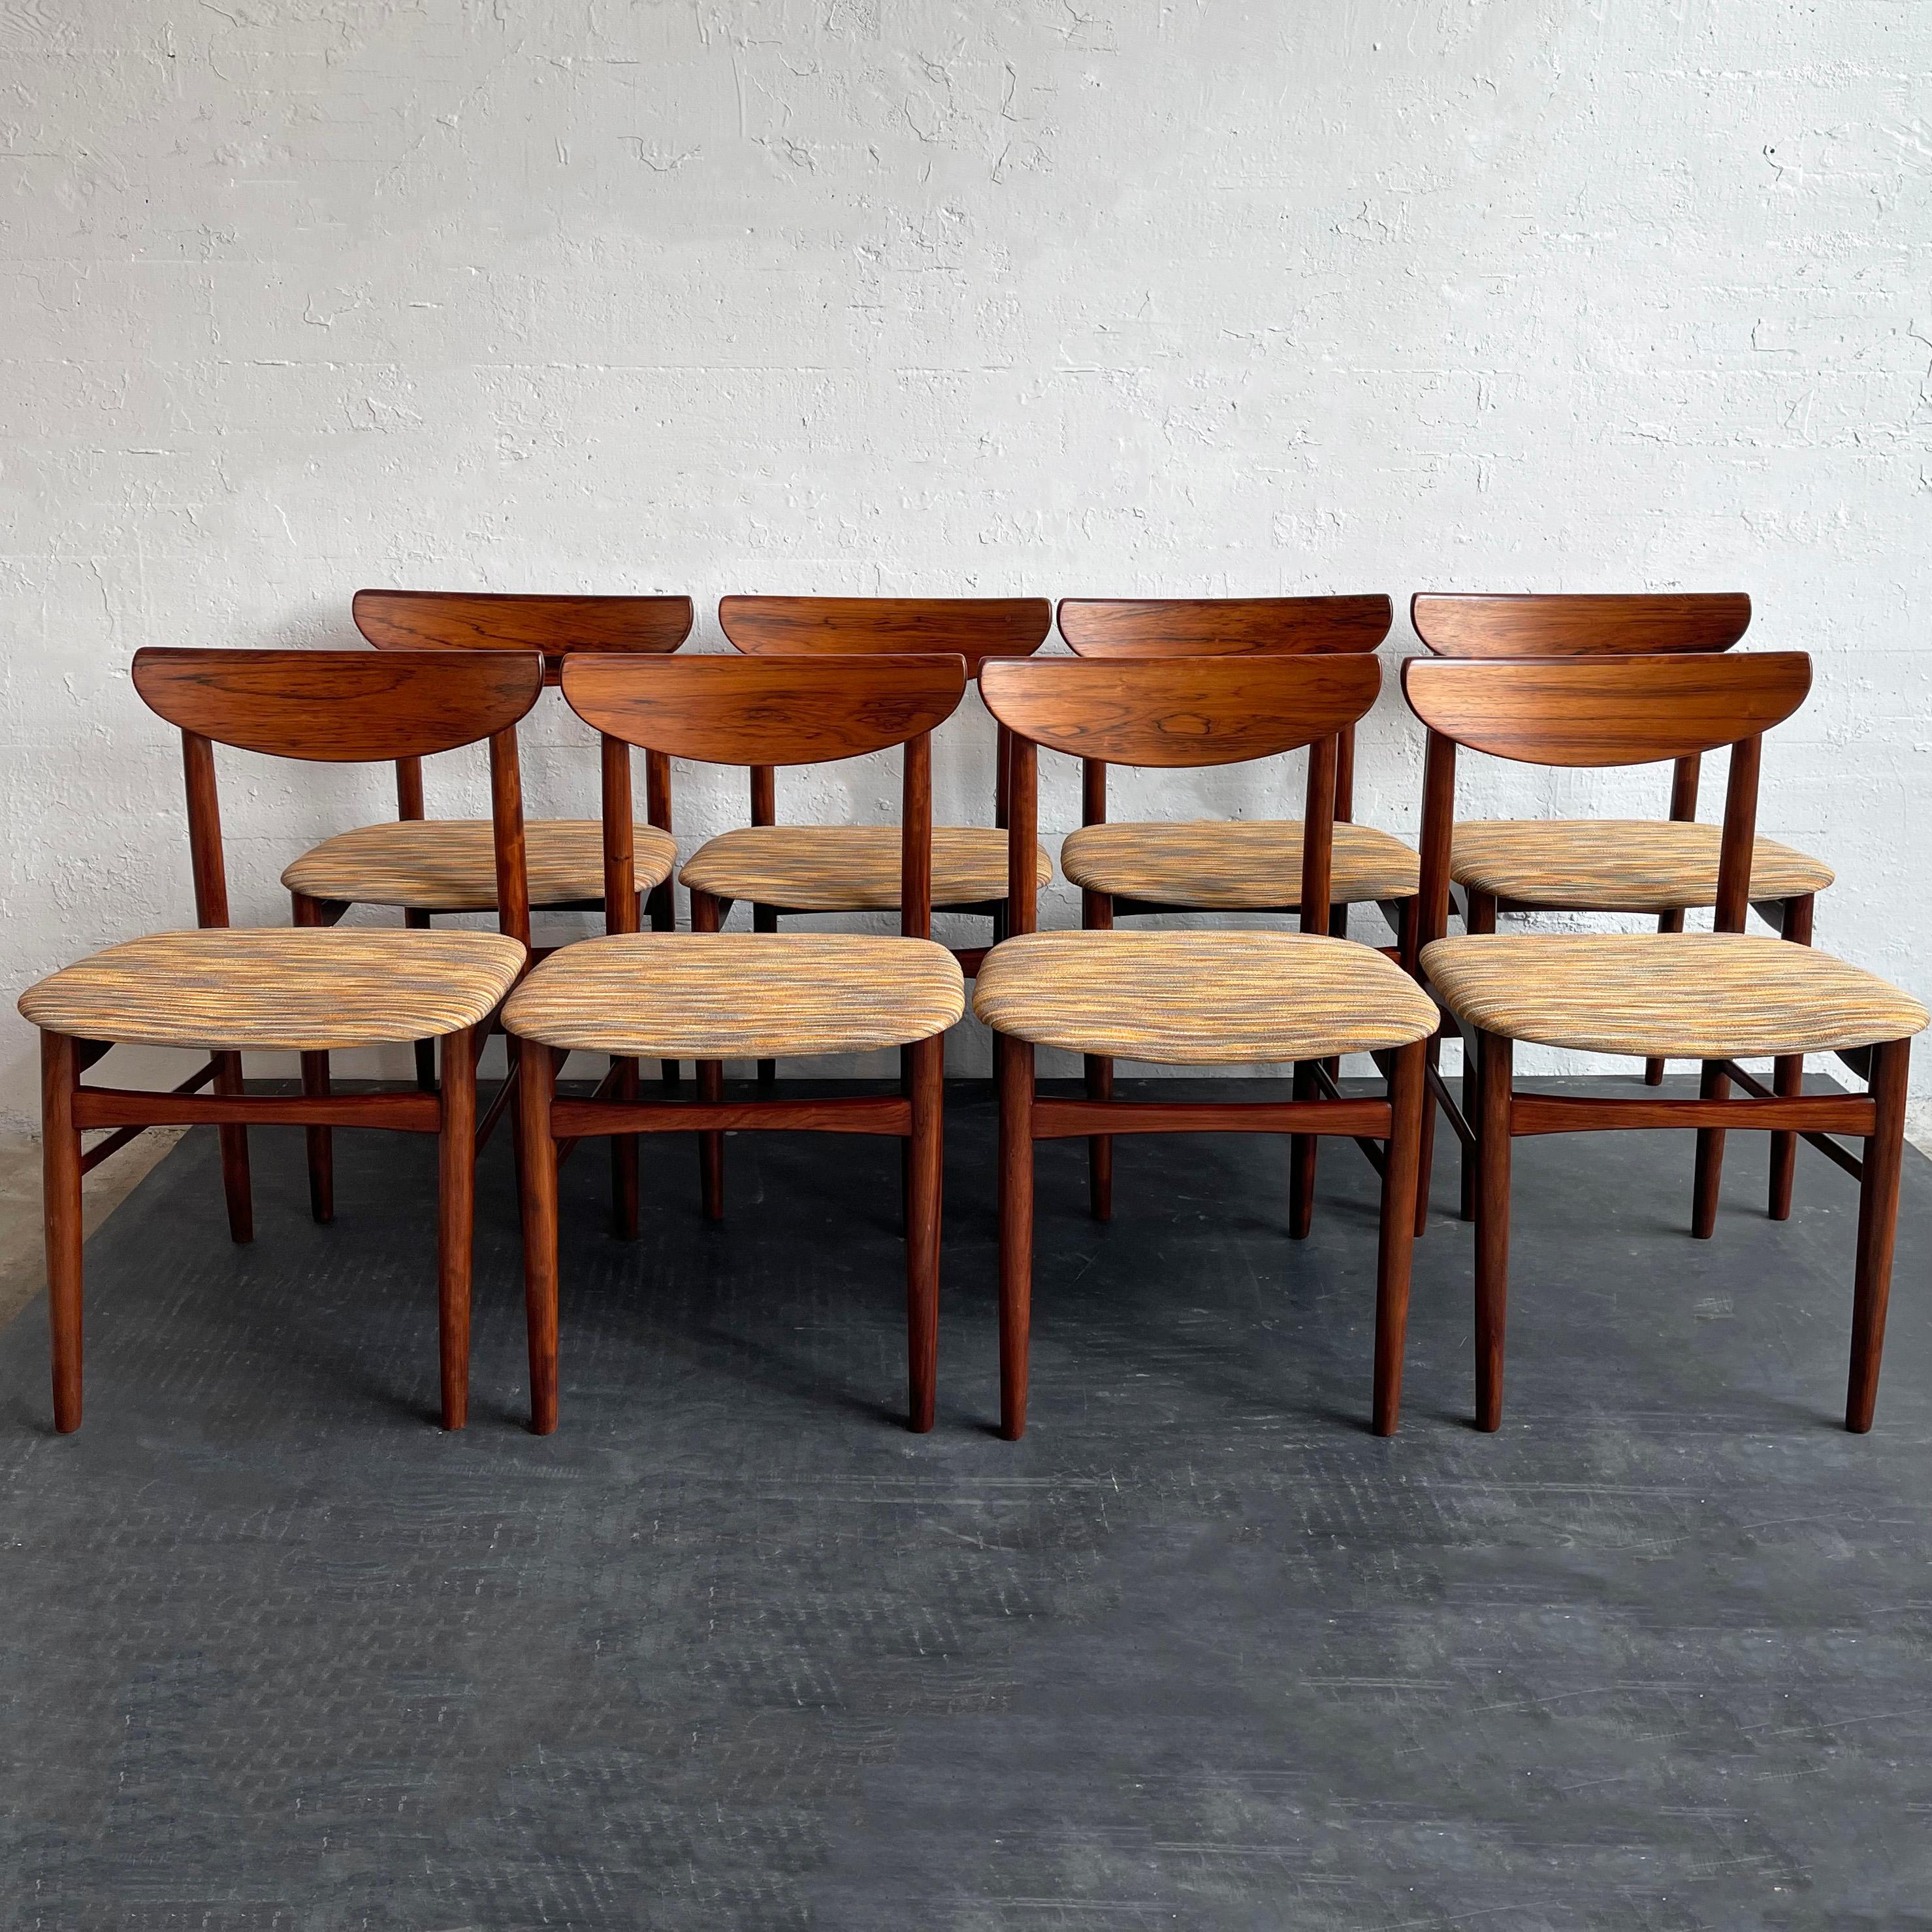 Set of 8, Danish modern dining chairs designed by Kurt Østervig for K.P. Møbler, 1959, Denmark. These elegant chairs feature beautifully grained, Brazilian rosewood frames with sculpted backrests and newly upholstered seats in a multicolor uneven